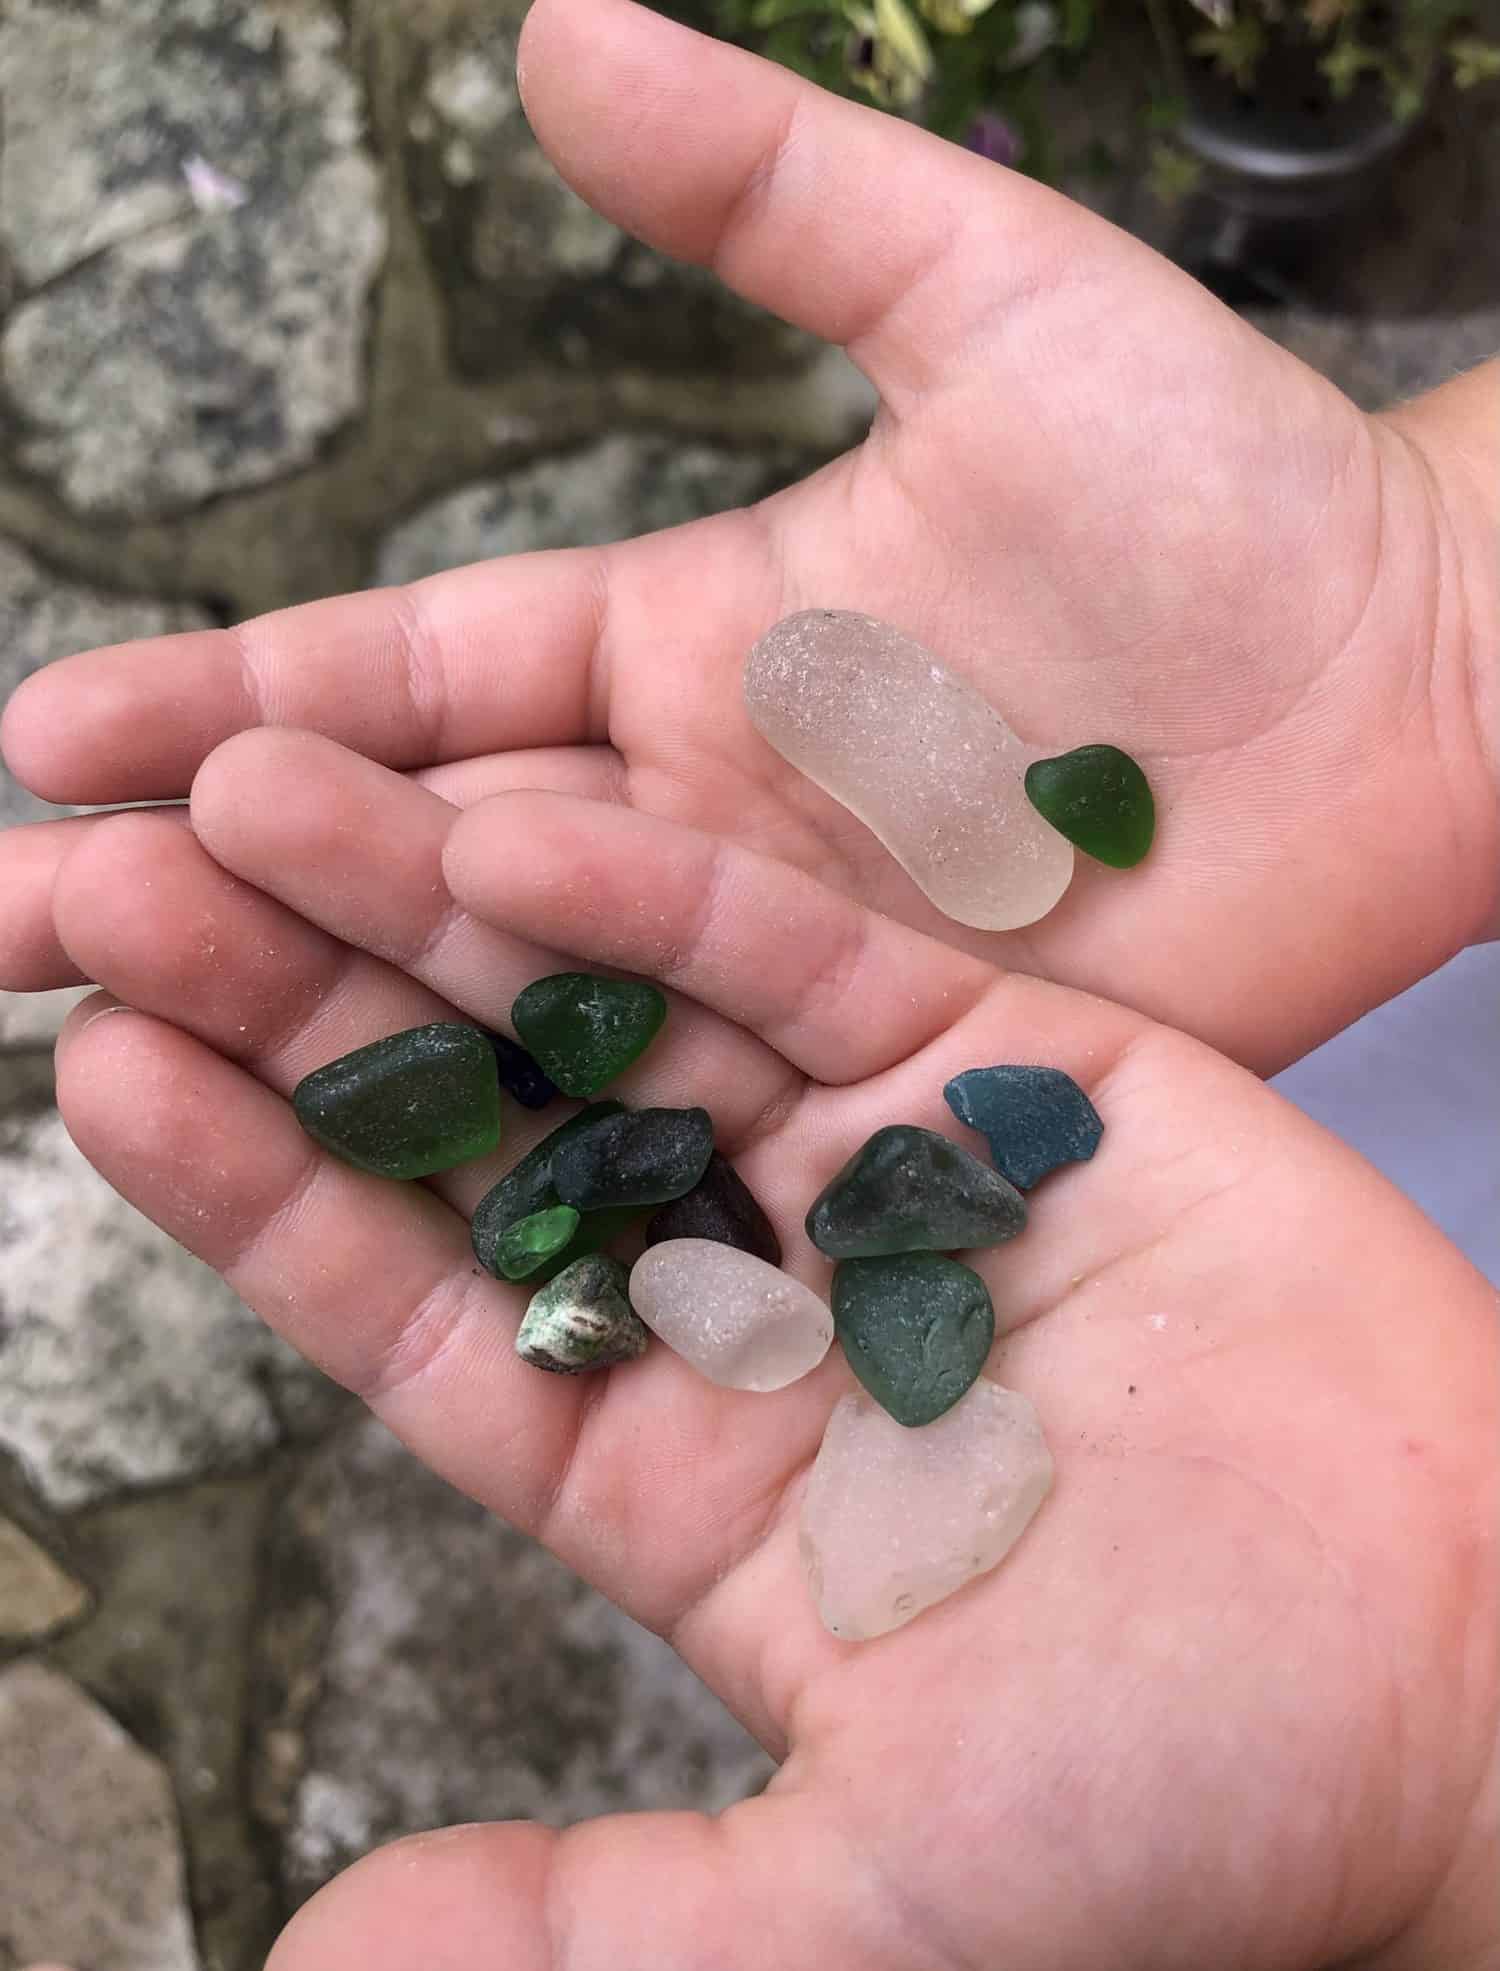 We love looking in the shingle for sea glass gemstones